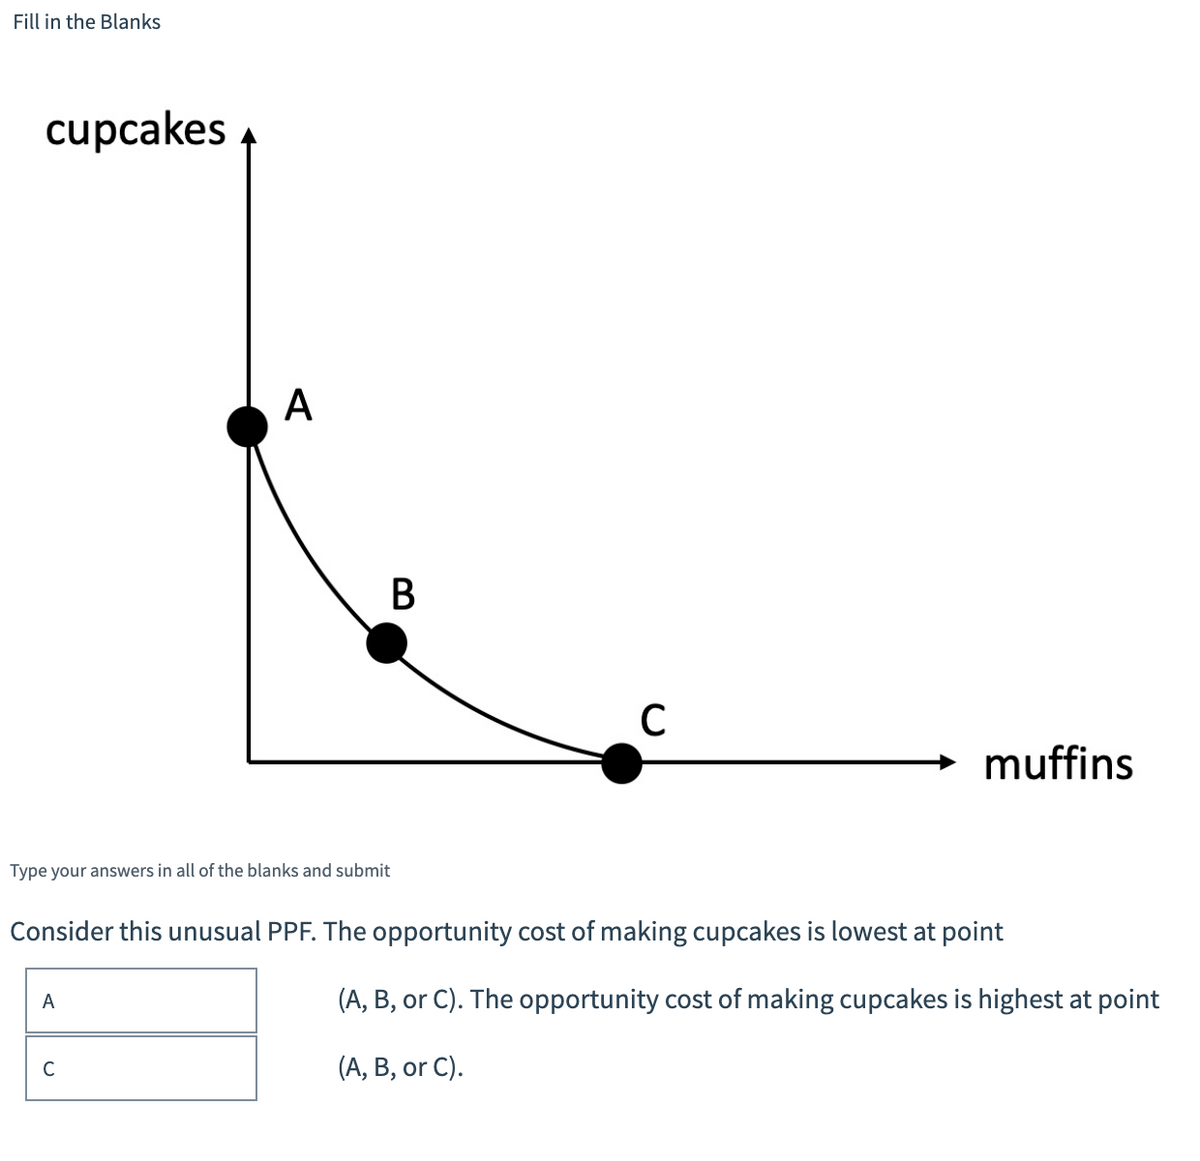 Fill in the Blanks
cupcakes
A
В
muffins
Type your answers in all of the blanks and submit
Consider this unusual PPF. The opportunity cost of making cupcakes is lowest at point
A
(A, B, or C). The opportunity cost of making cupcakes is highest at point
C
(A, B, or C).
